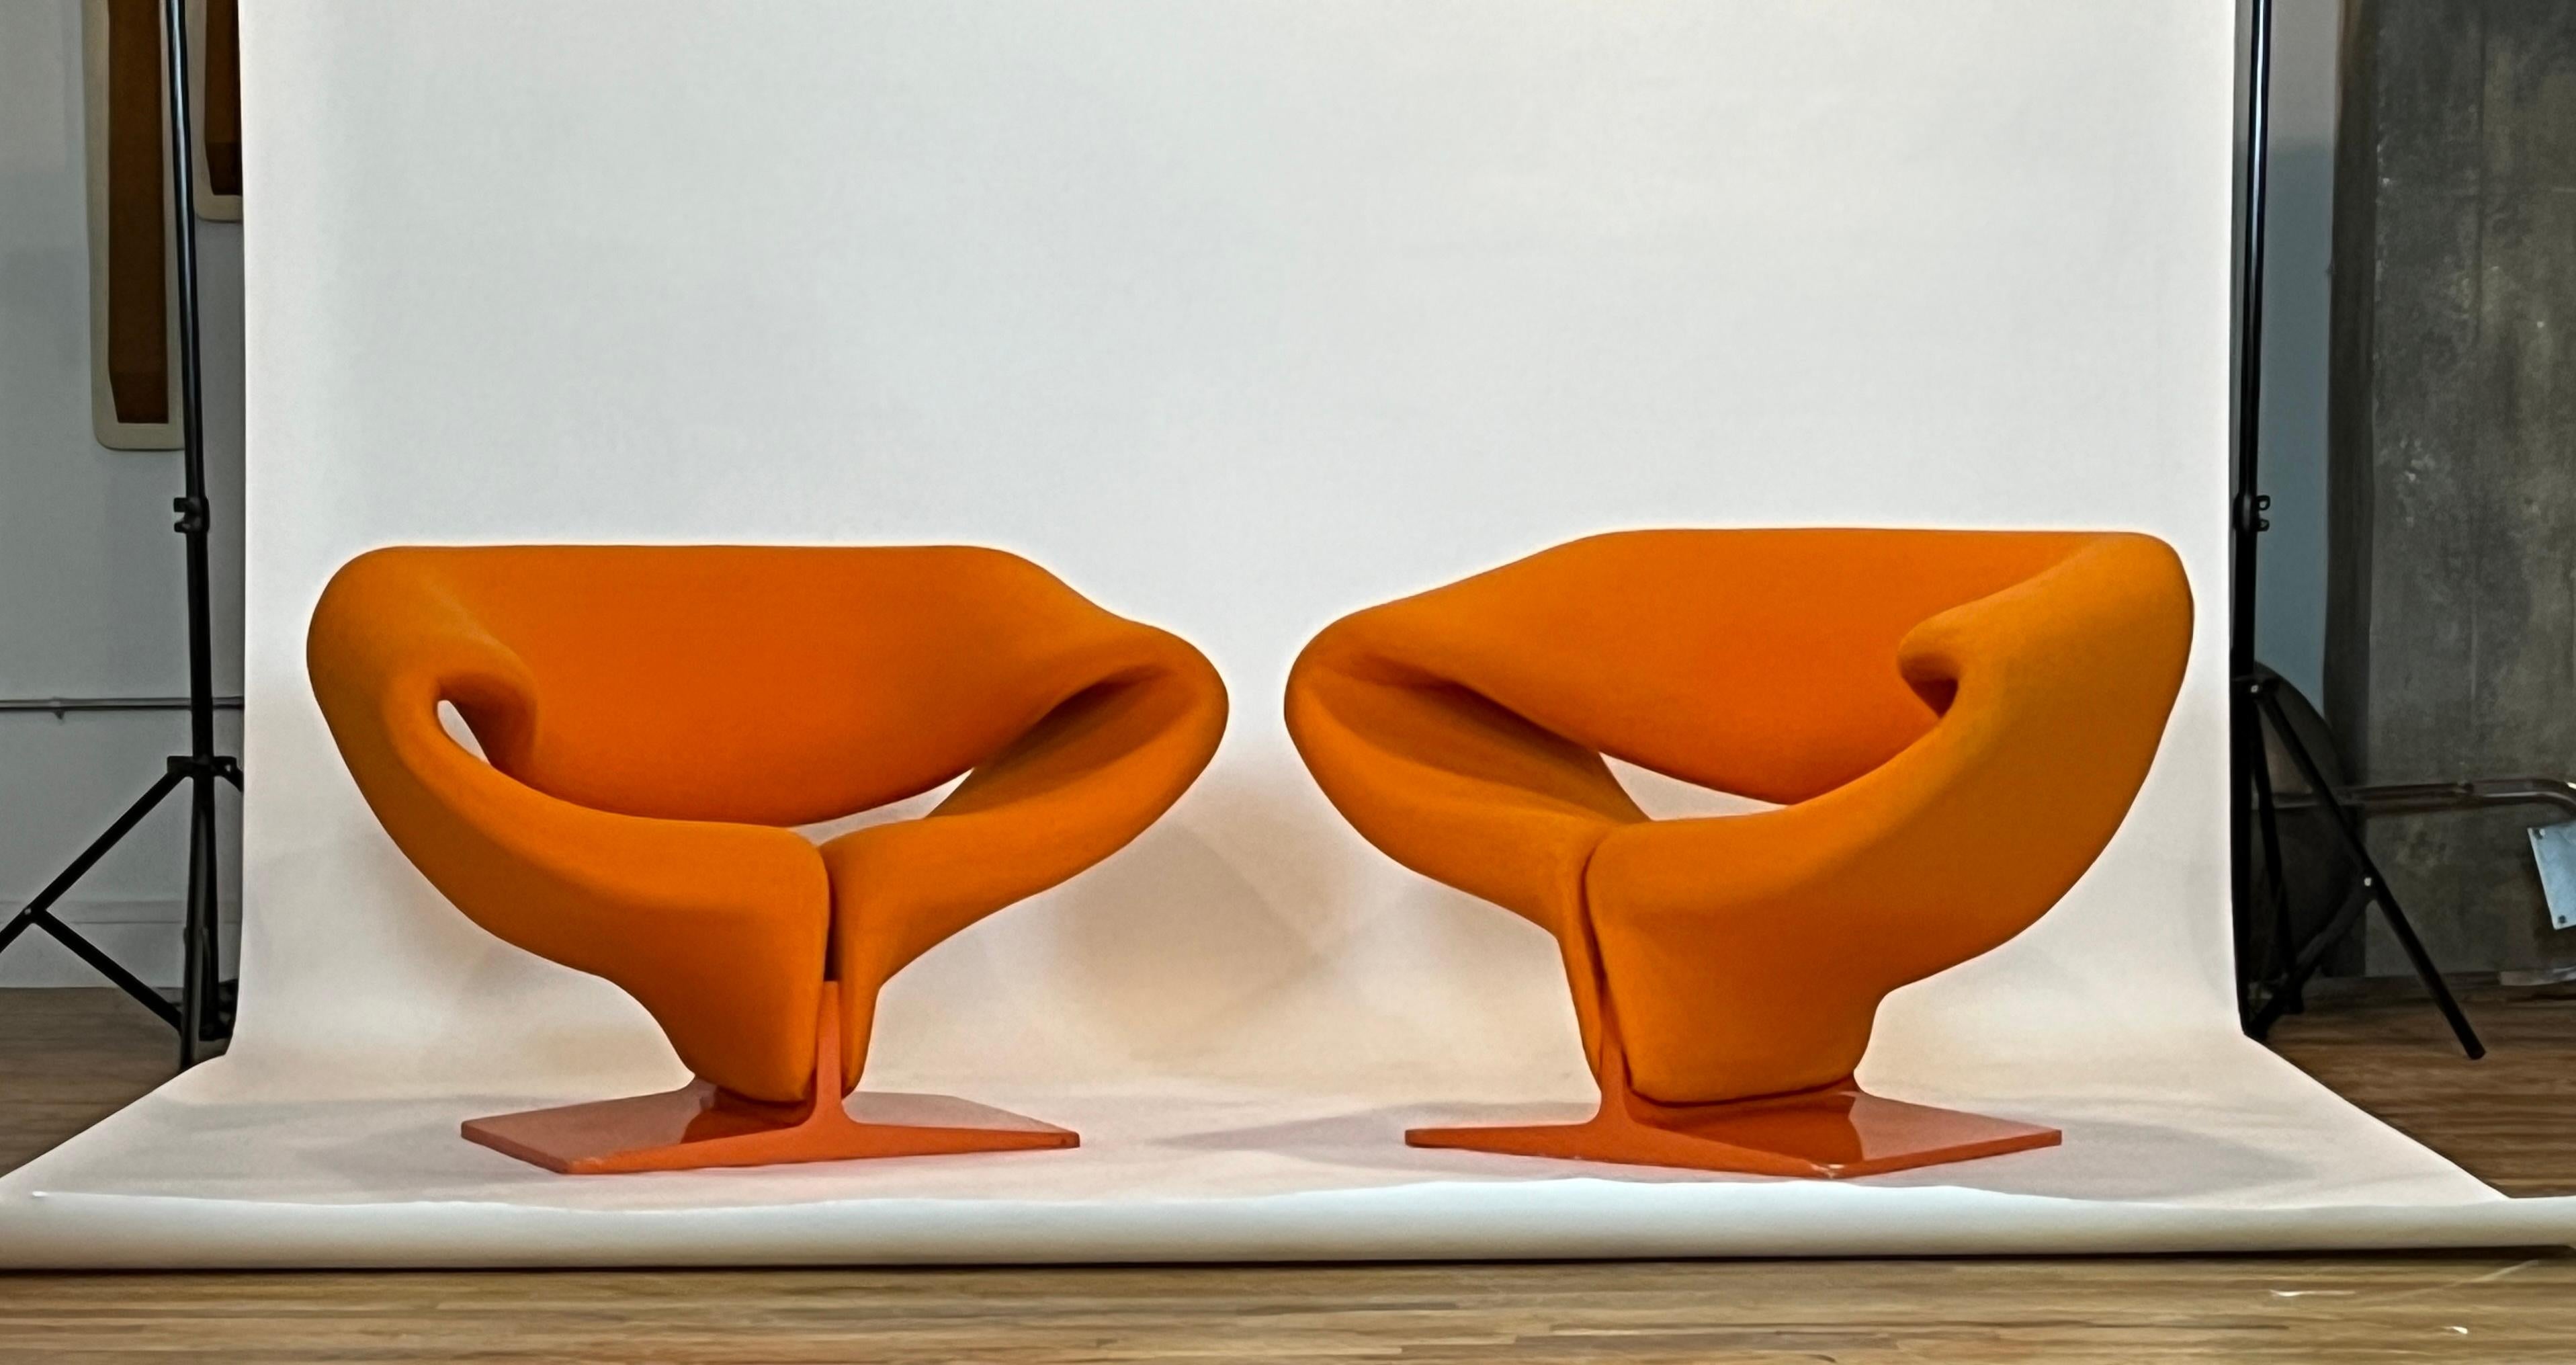 Pair of Artifort Pierre Paulin ribbon chairs model 582 with contoured tubular steel shape. Space age form with curling sides and molded comfortable upholstered loop chair floating on a pedestal base, mounted on lacquer wood base. Chairs and bases